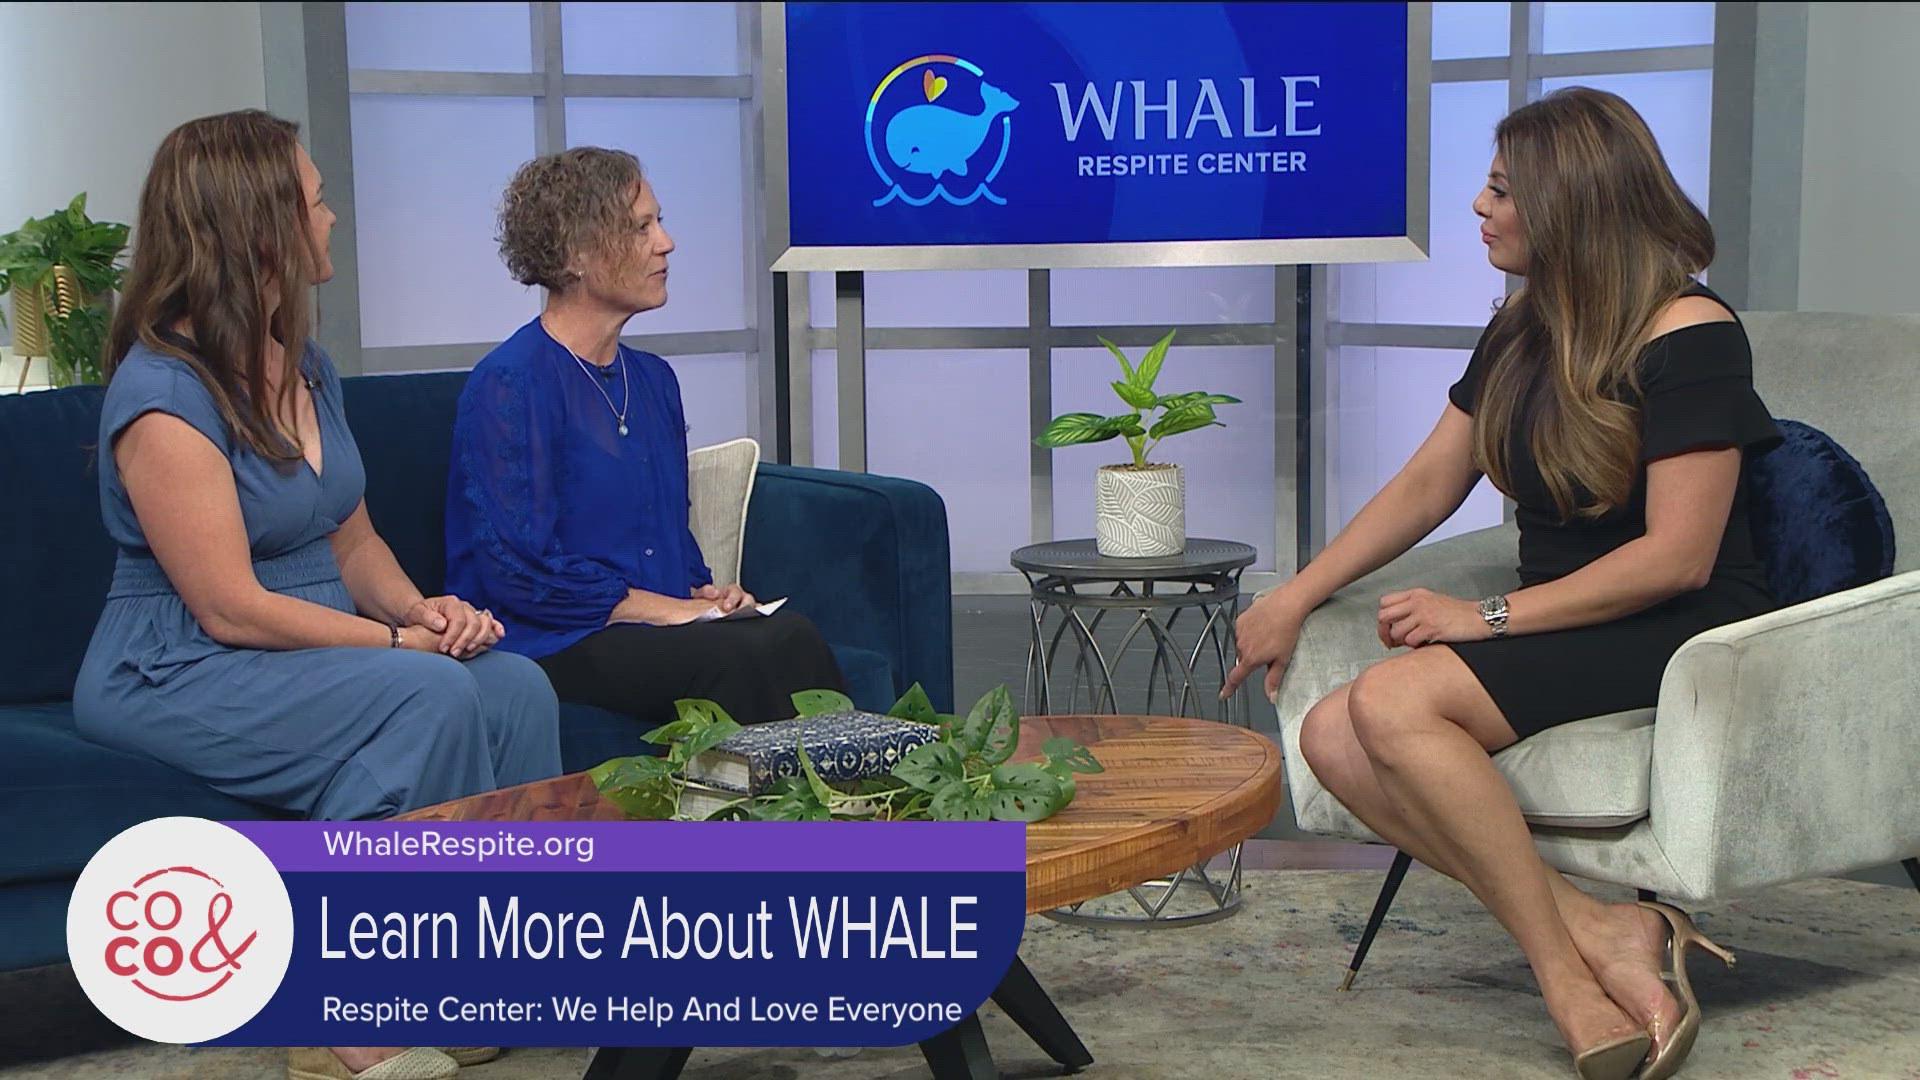 WHALE serves children of all abilities and families by providing trailblazing respite services. Find out more at WhaleRespite.org.